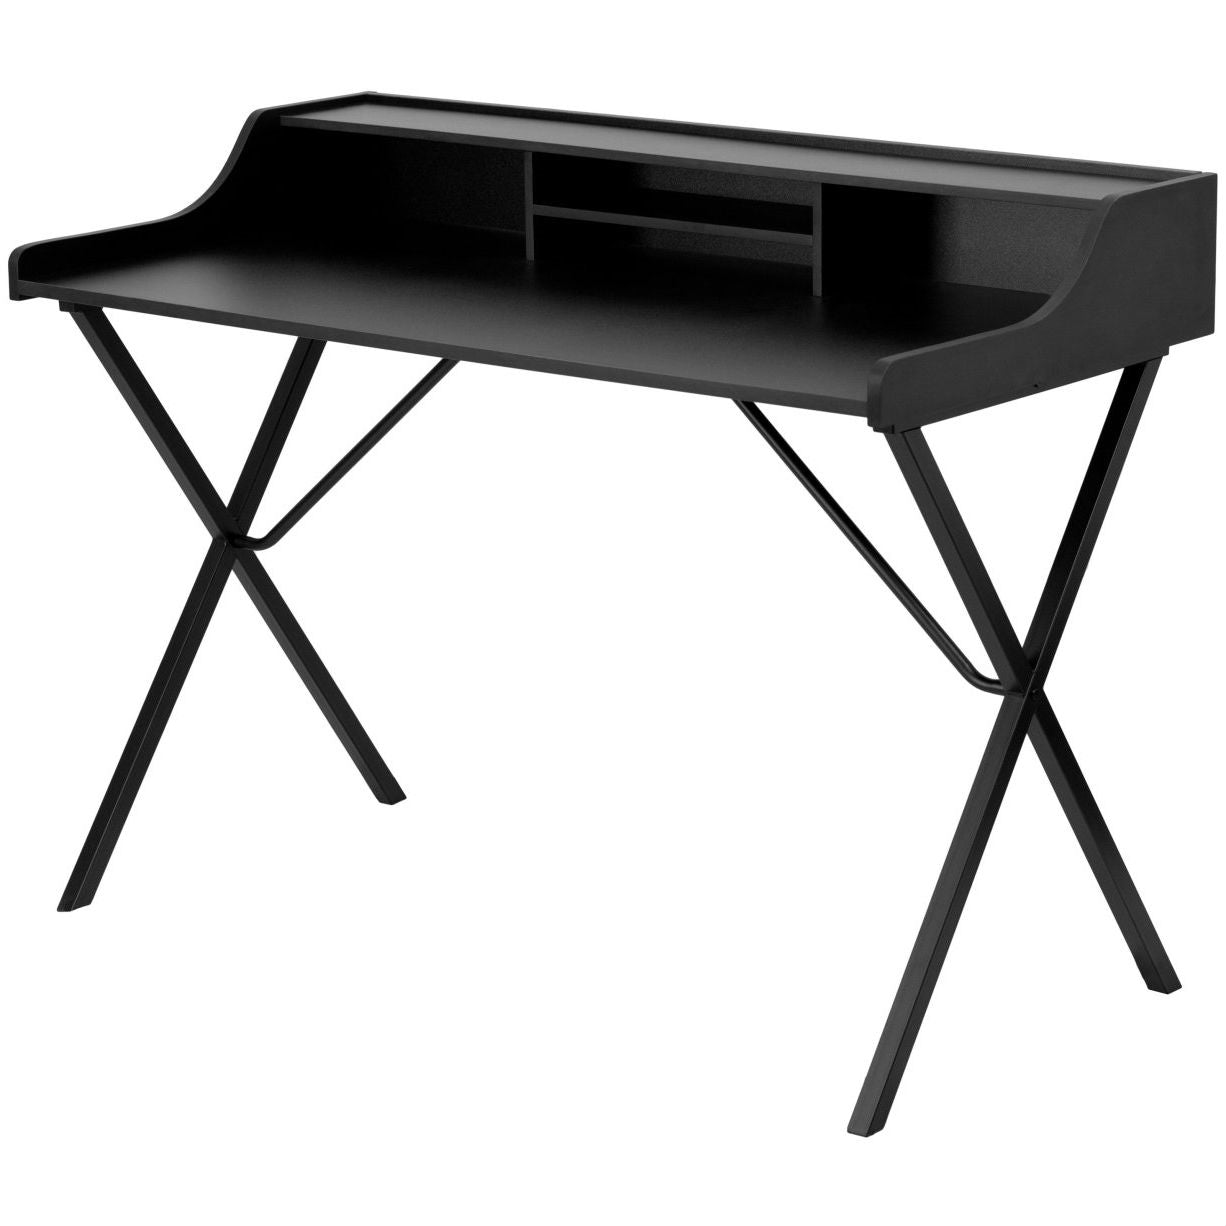 FastFurnishings Modern Black Office Table Computer Desk with Raised Top Shelf